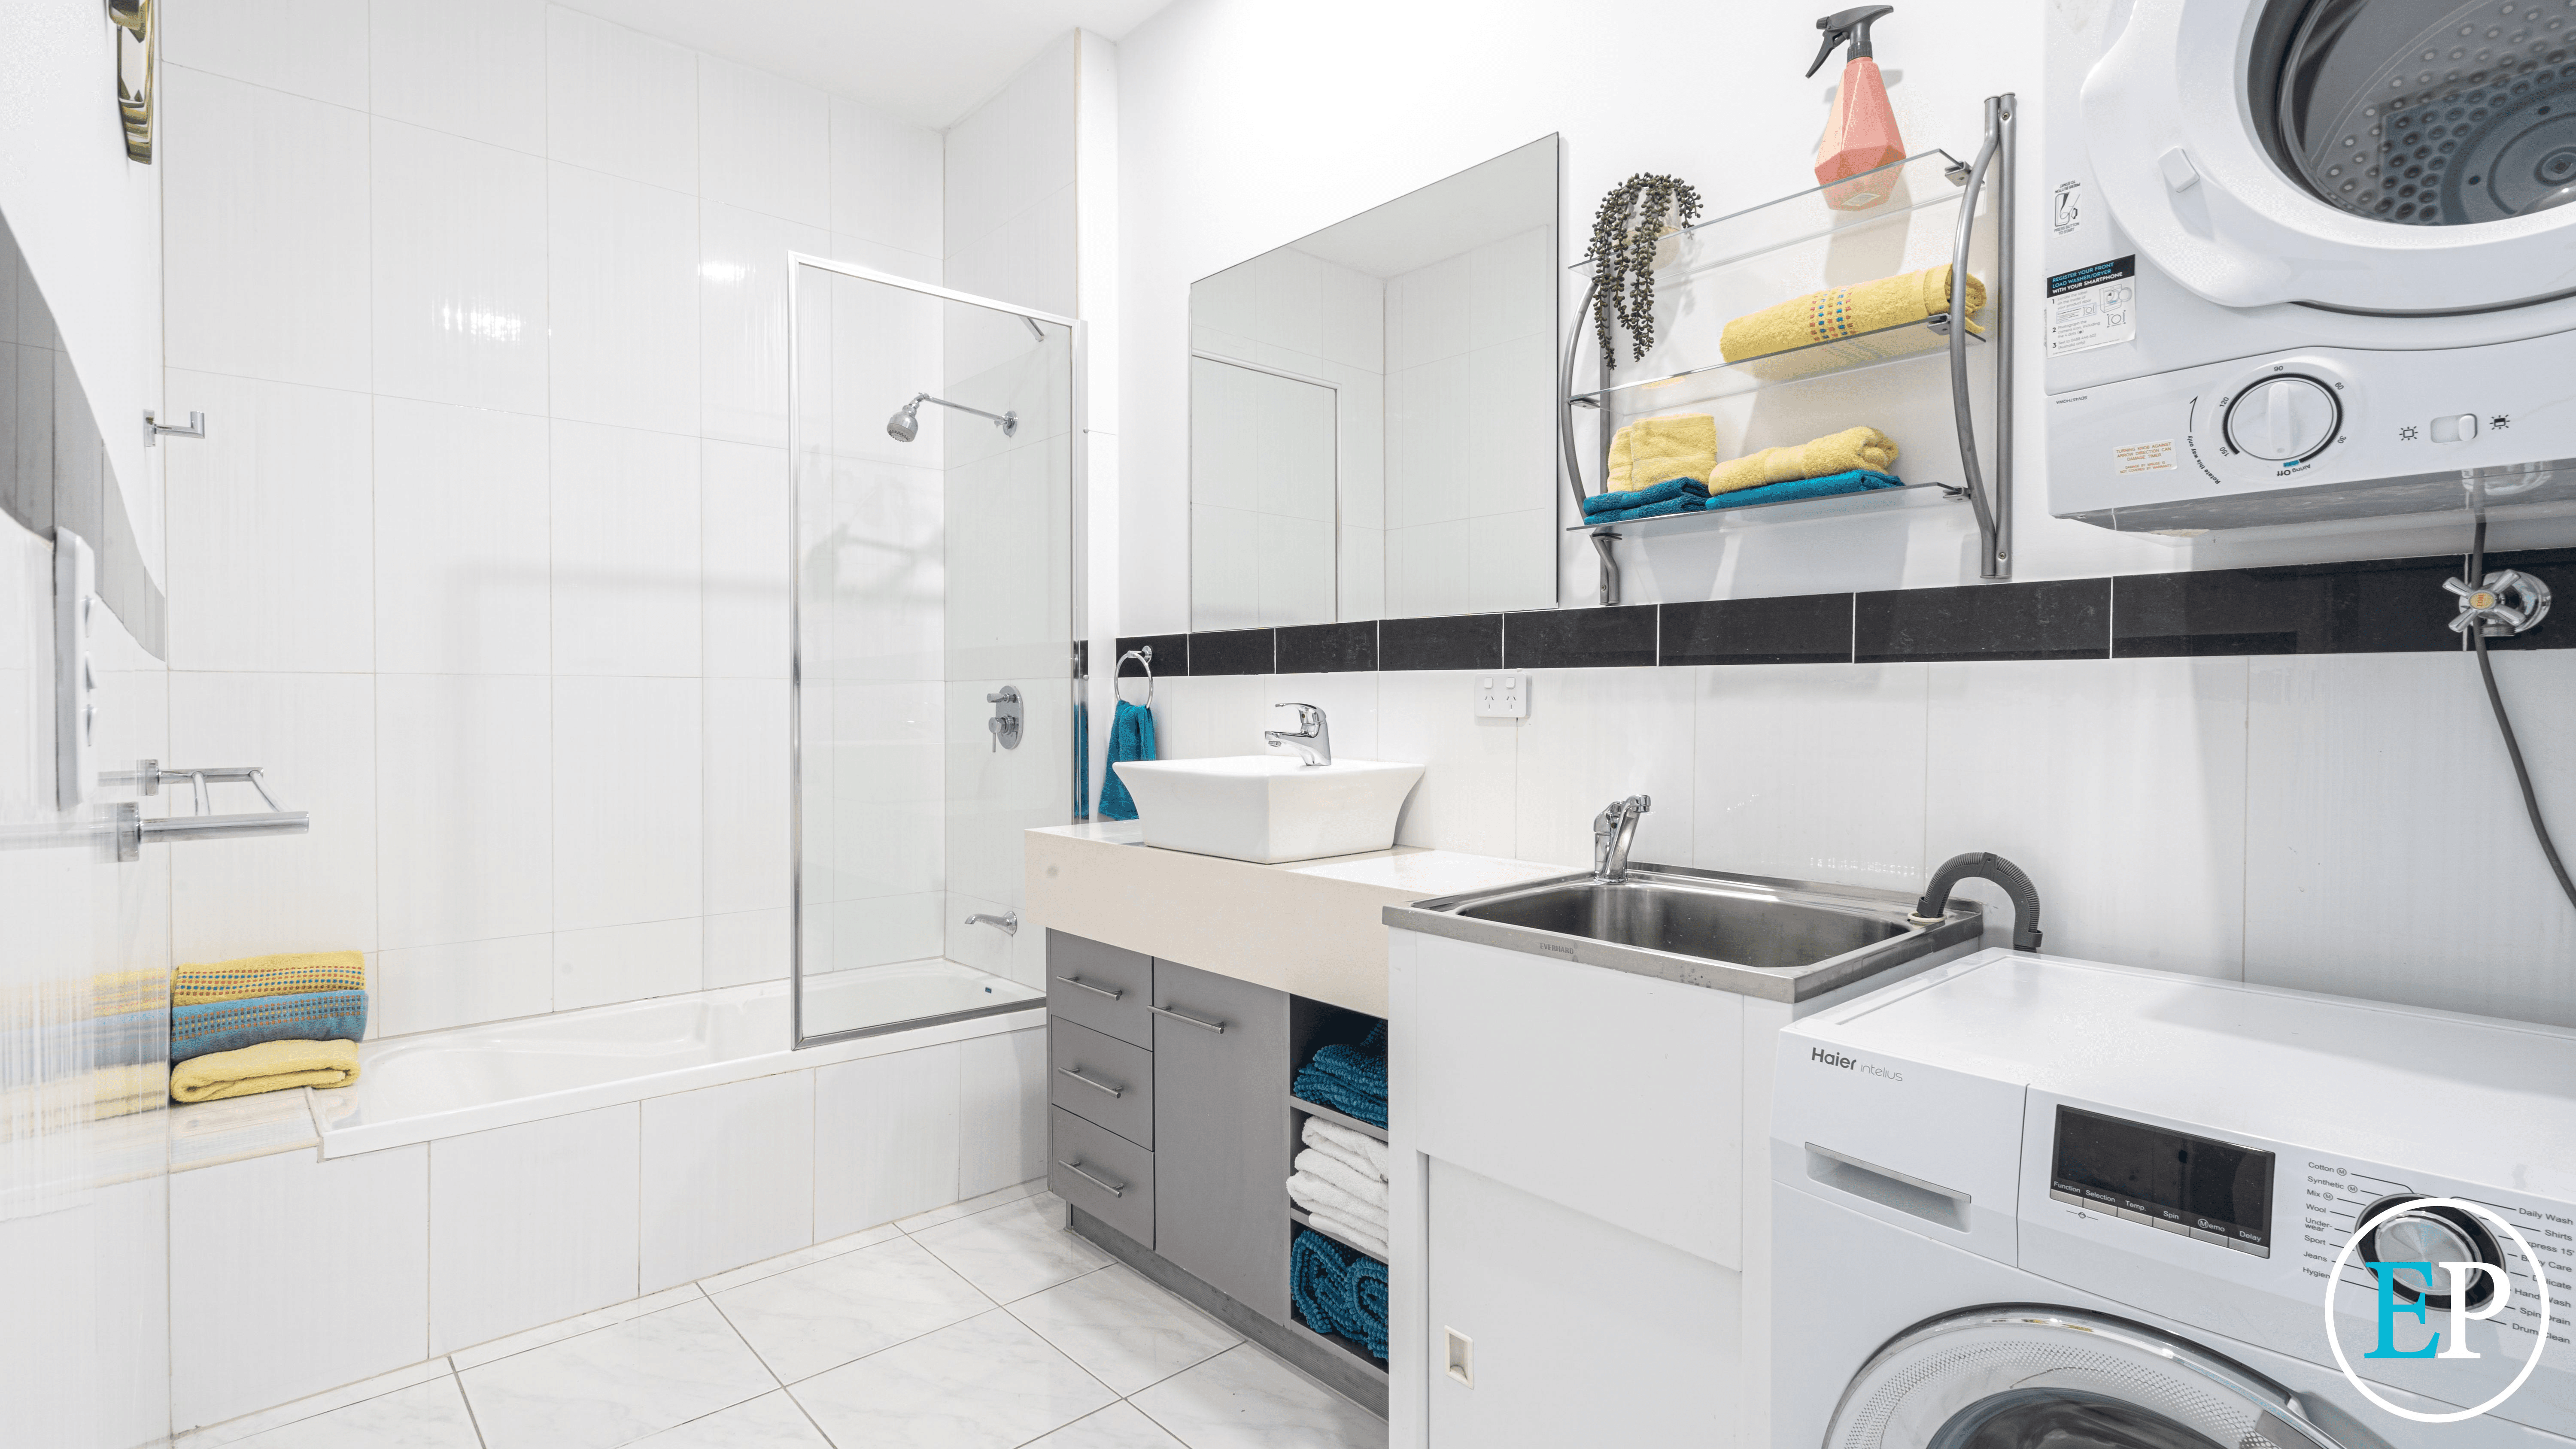 3/3-7 Macdonnell Road, MARGATE, QLD 4019